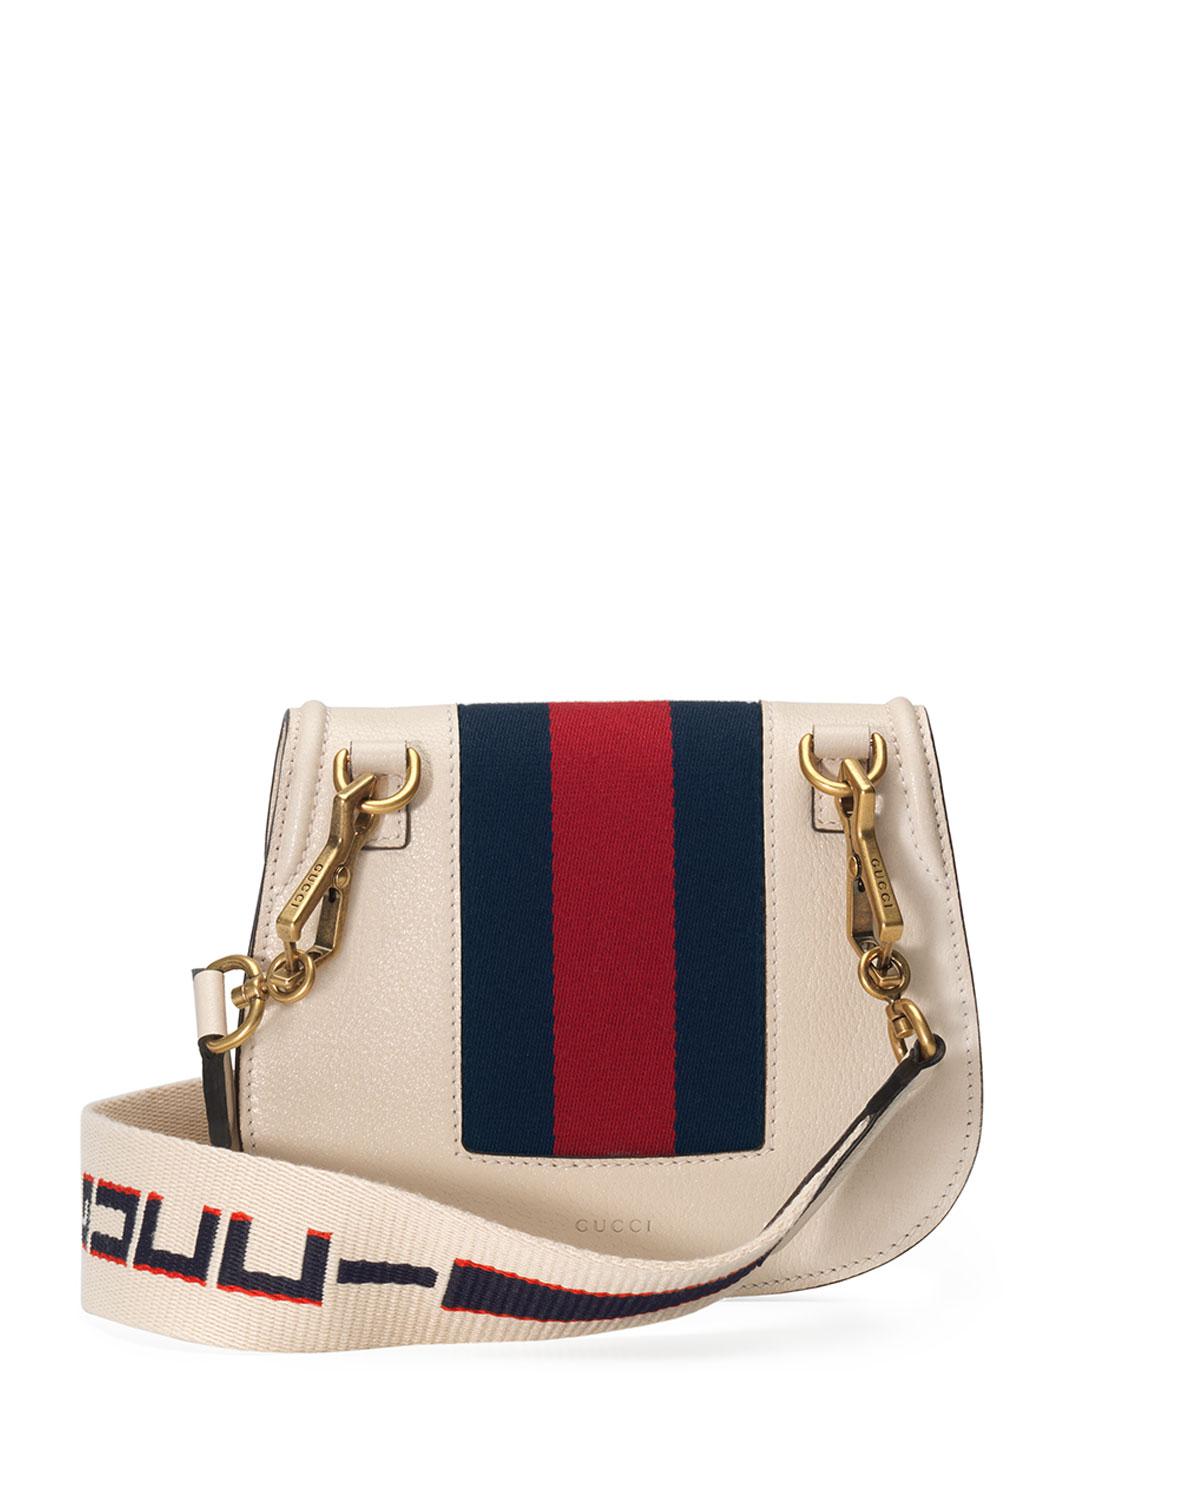 White Gucci Bag With Butterfly Hotsell, 58% OFF | lagence.tv